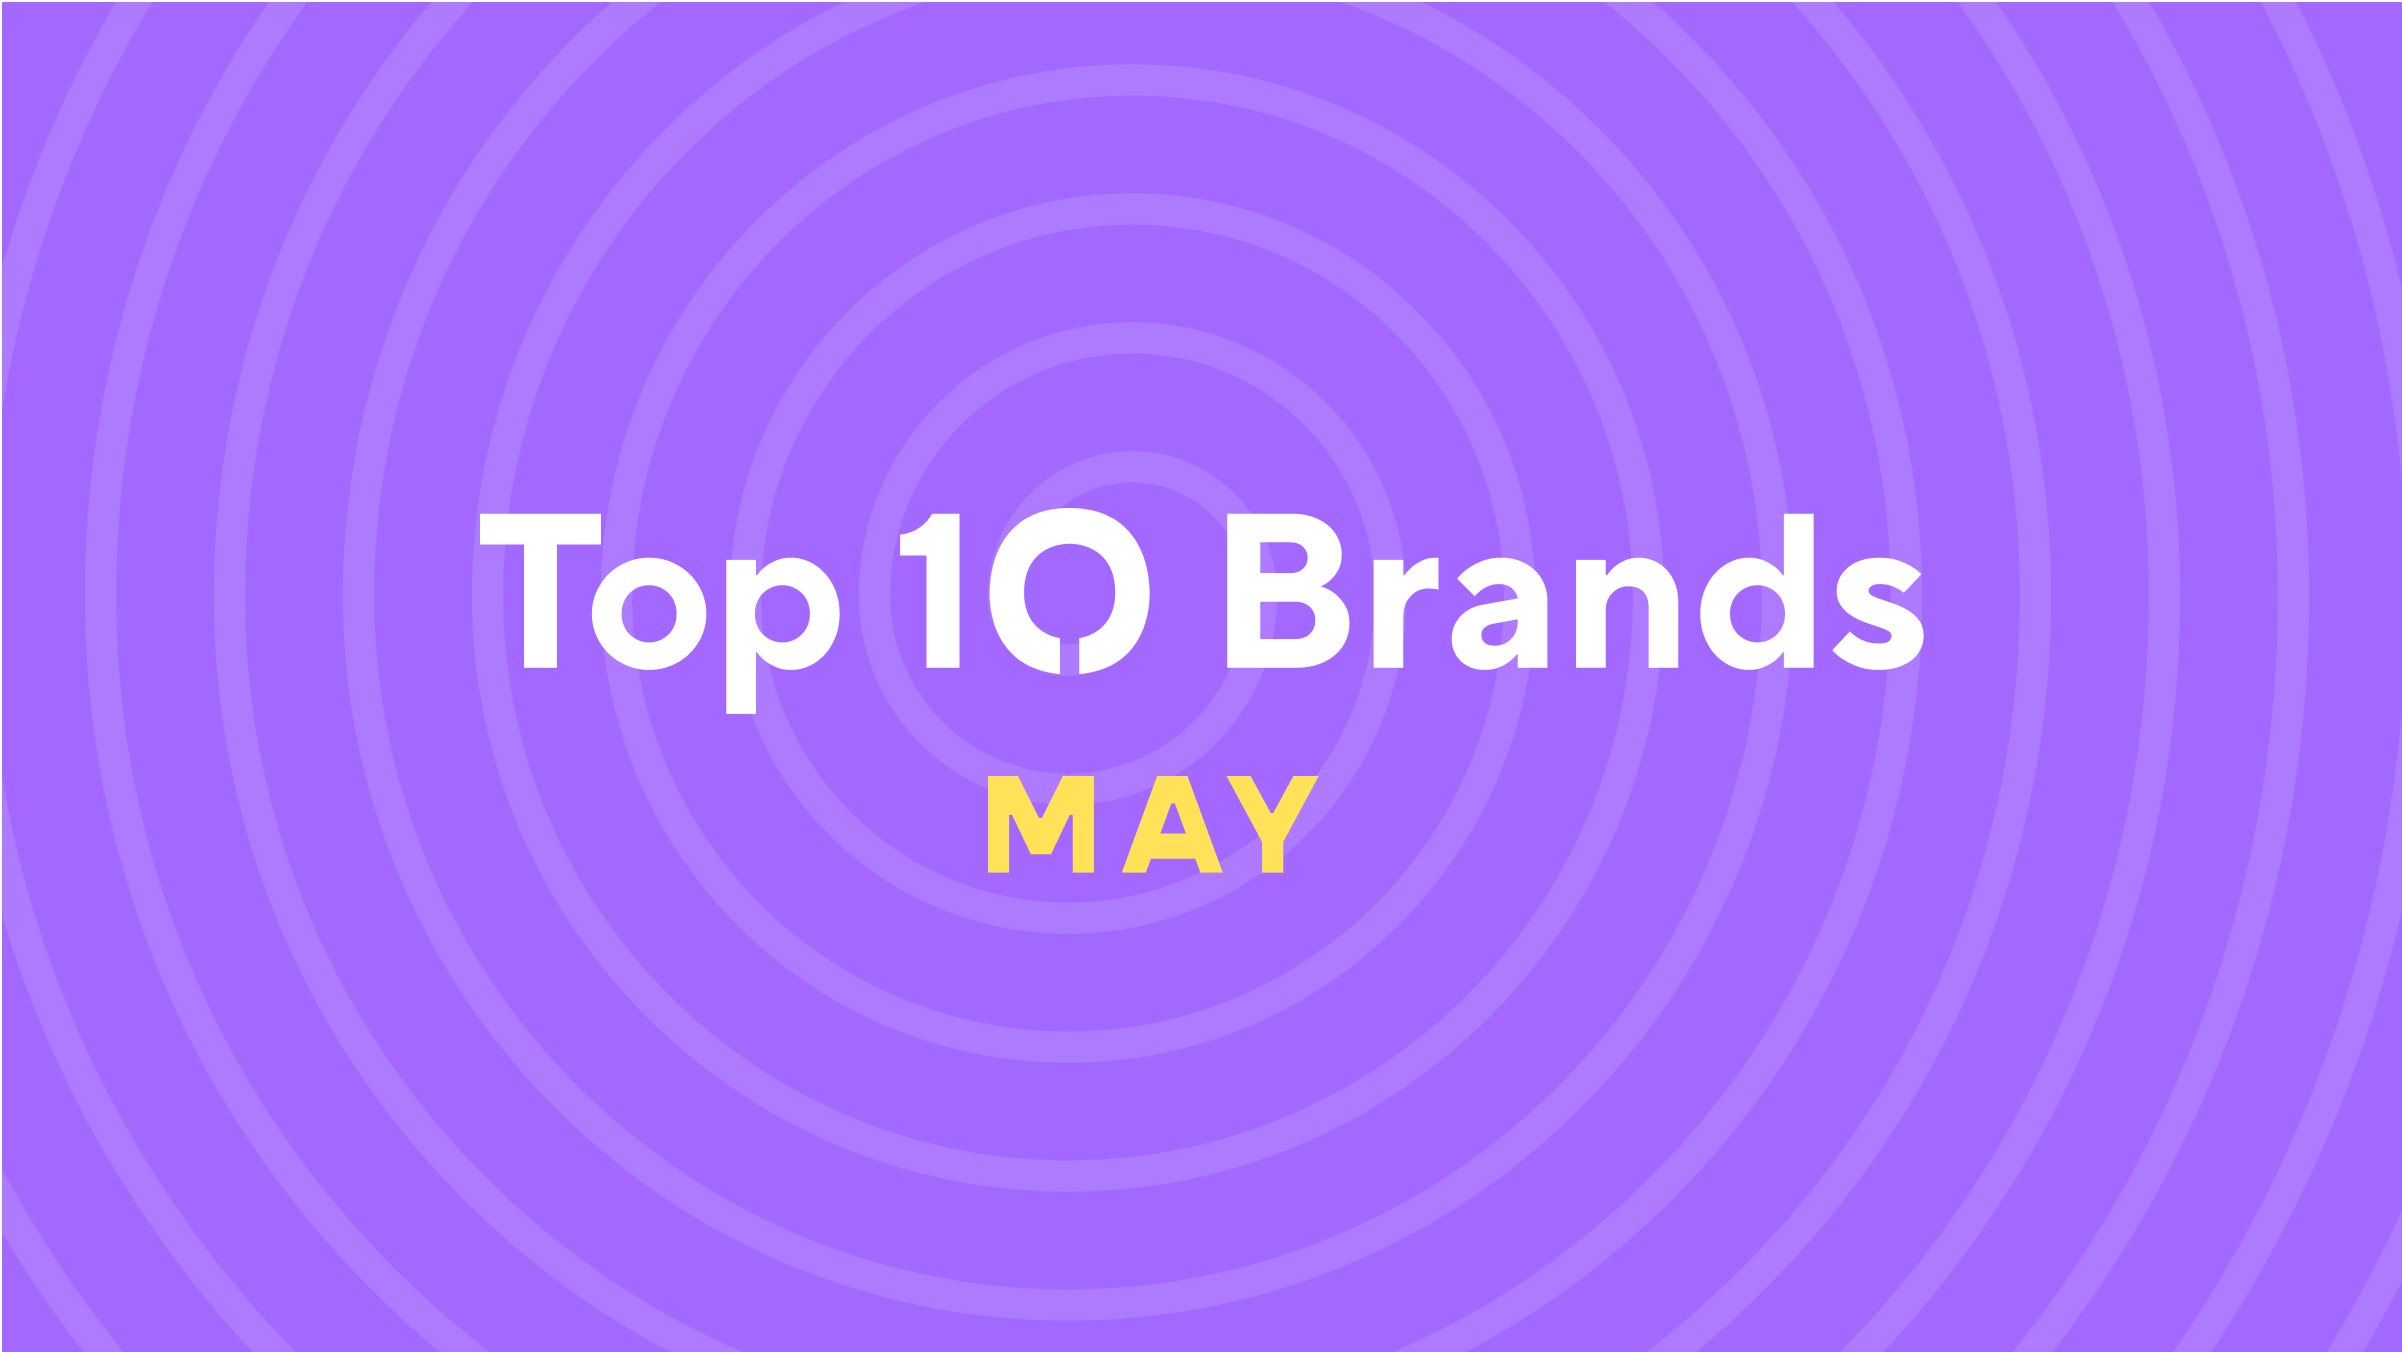 Where to Shop in May for Bitcoin Rewards